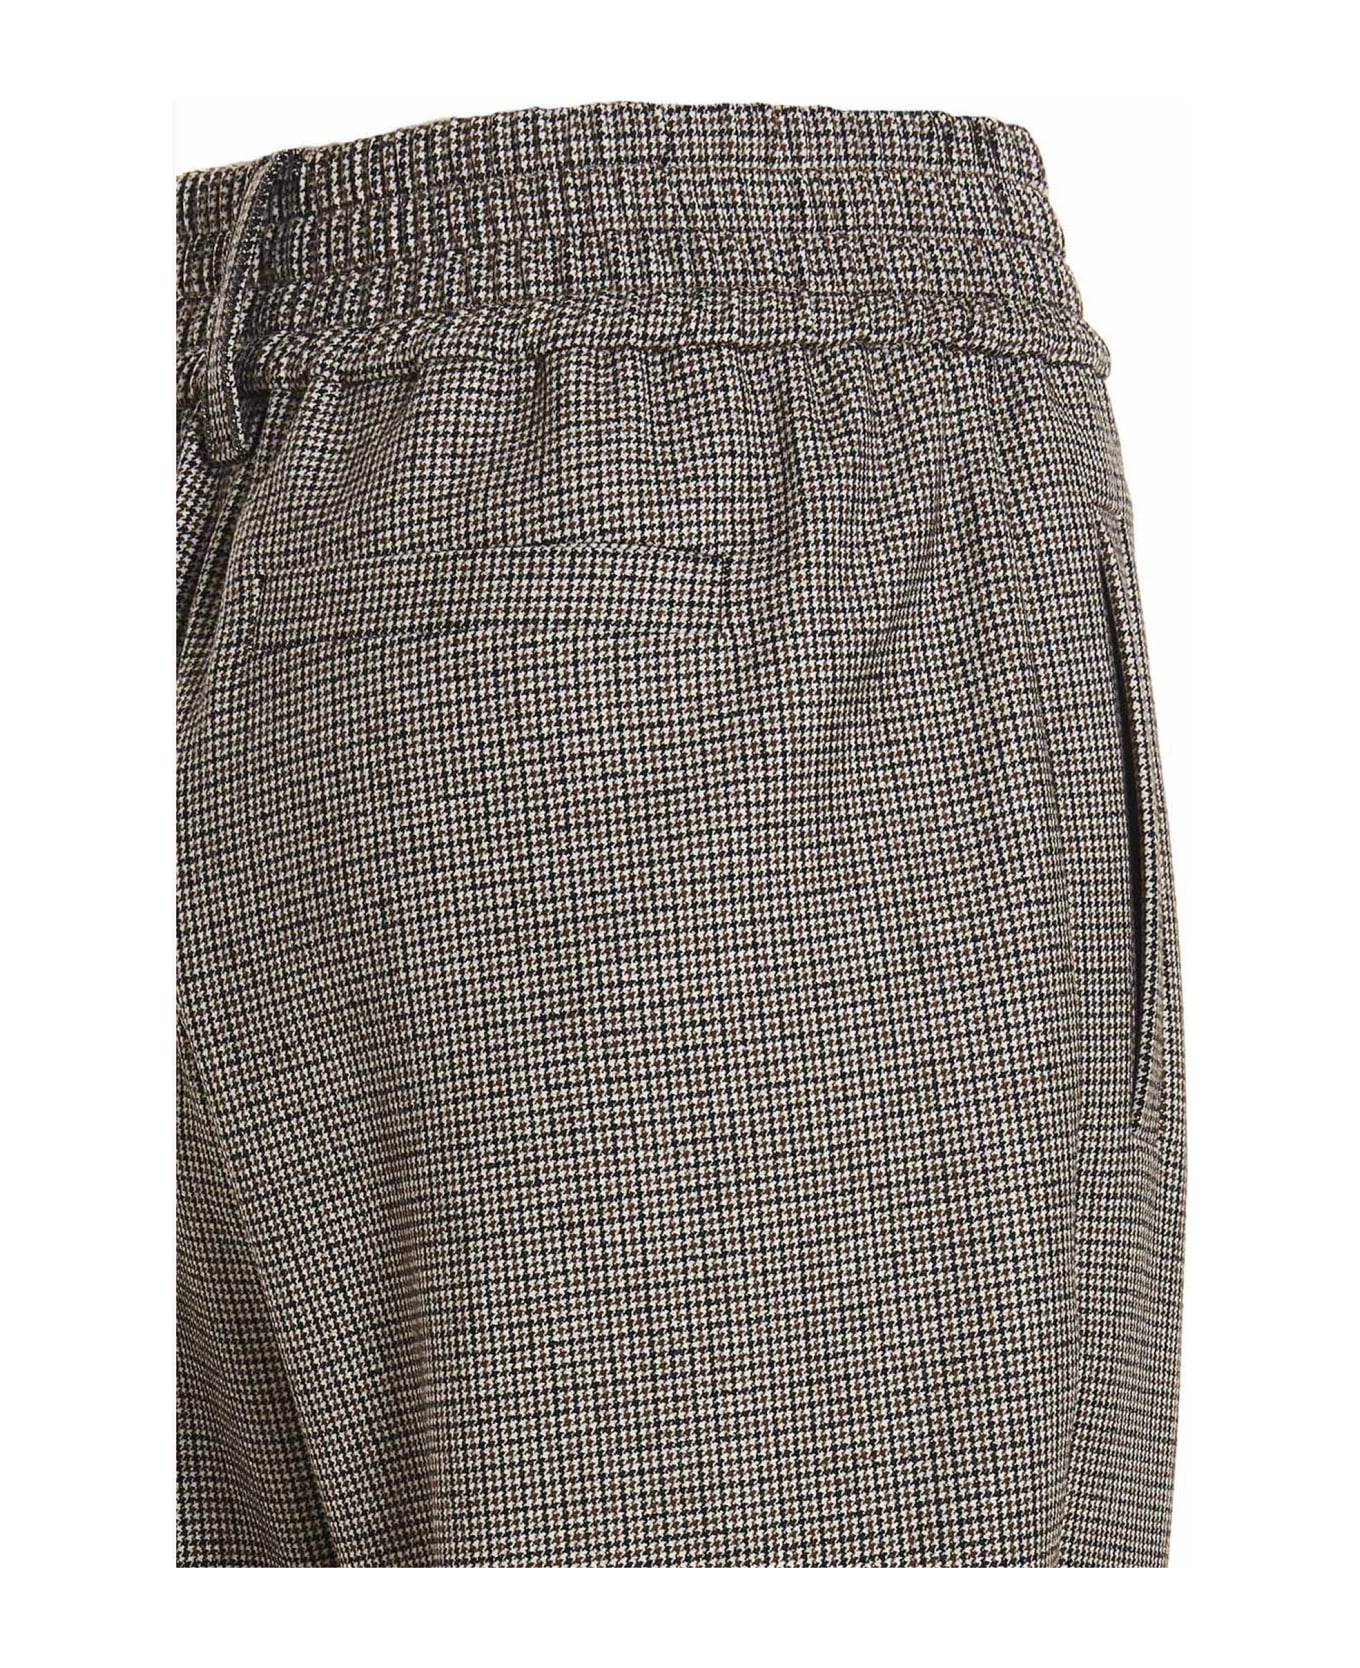 Brunello Cucinelli Prince Of Wales sublevel Trousers - Multicolor